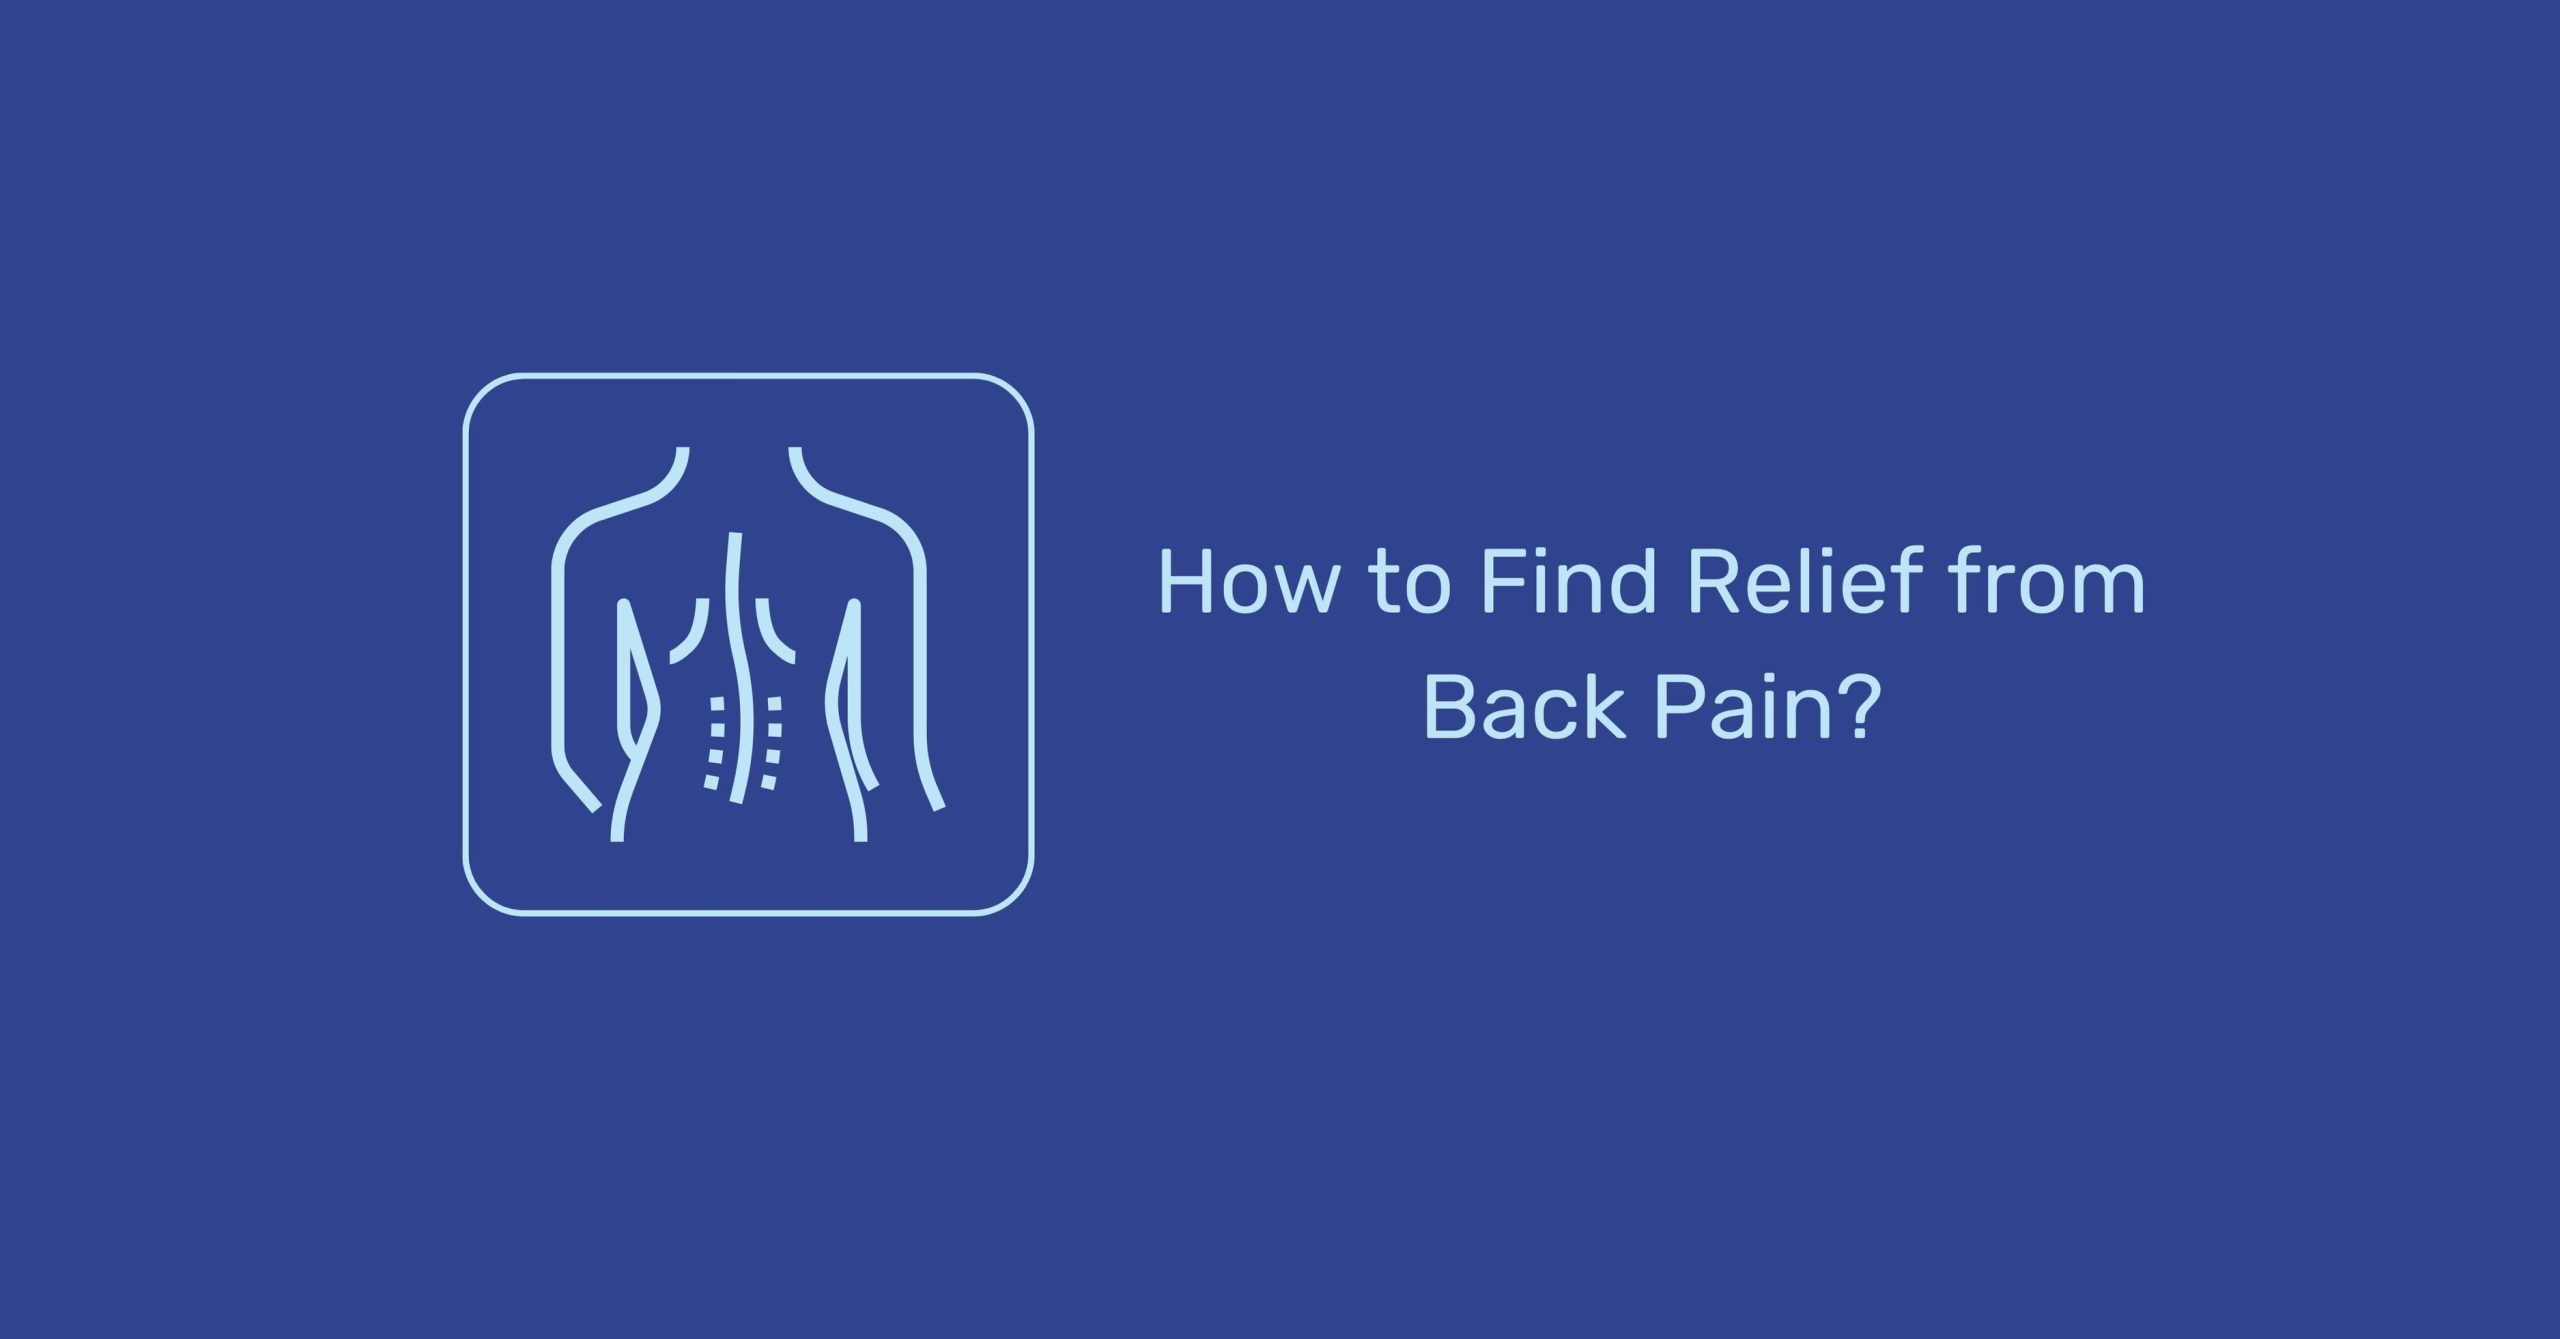 You ultimate guide to back pain relief that mentions back pain symptoms and preventive measure.